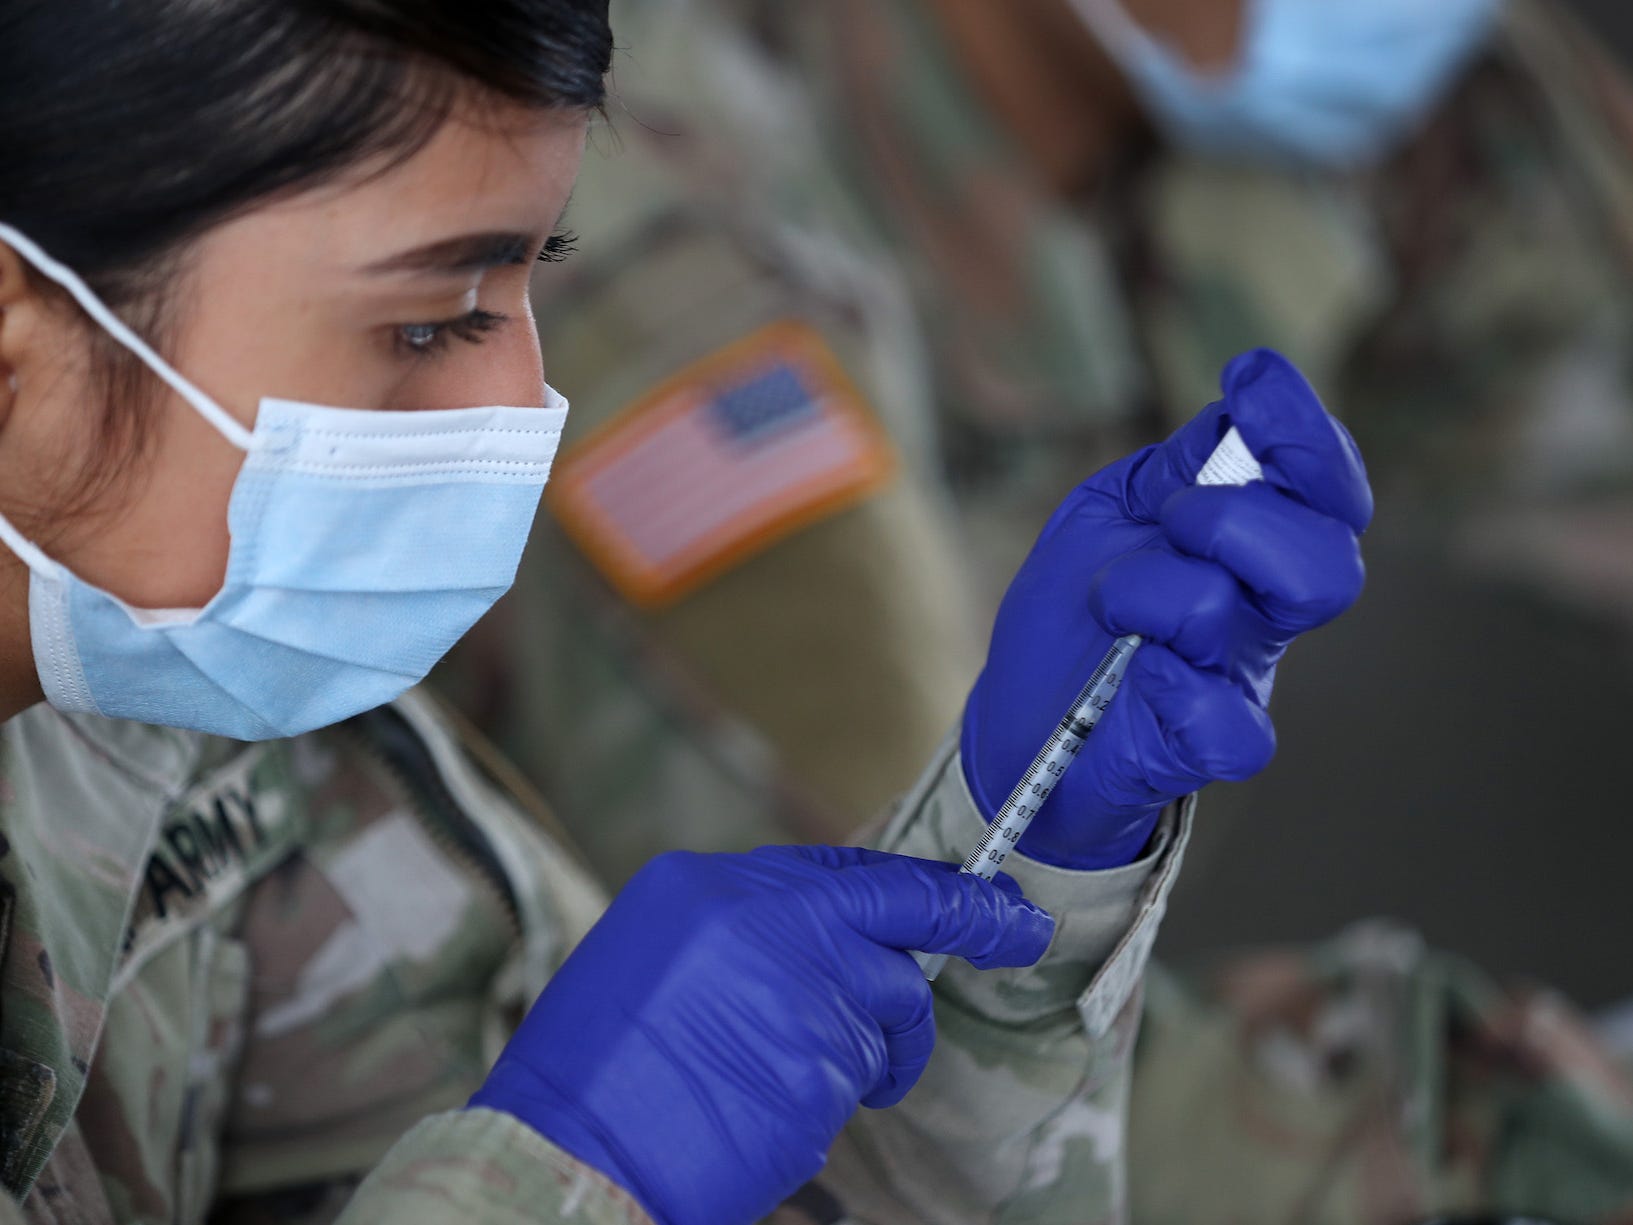 A woman wearing military garb a mask and gloves is measuring a dose of vaccine.